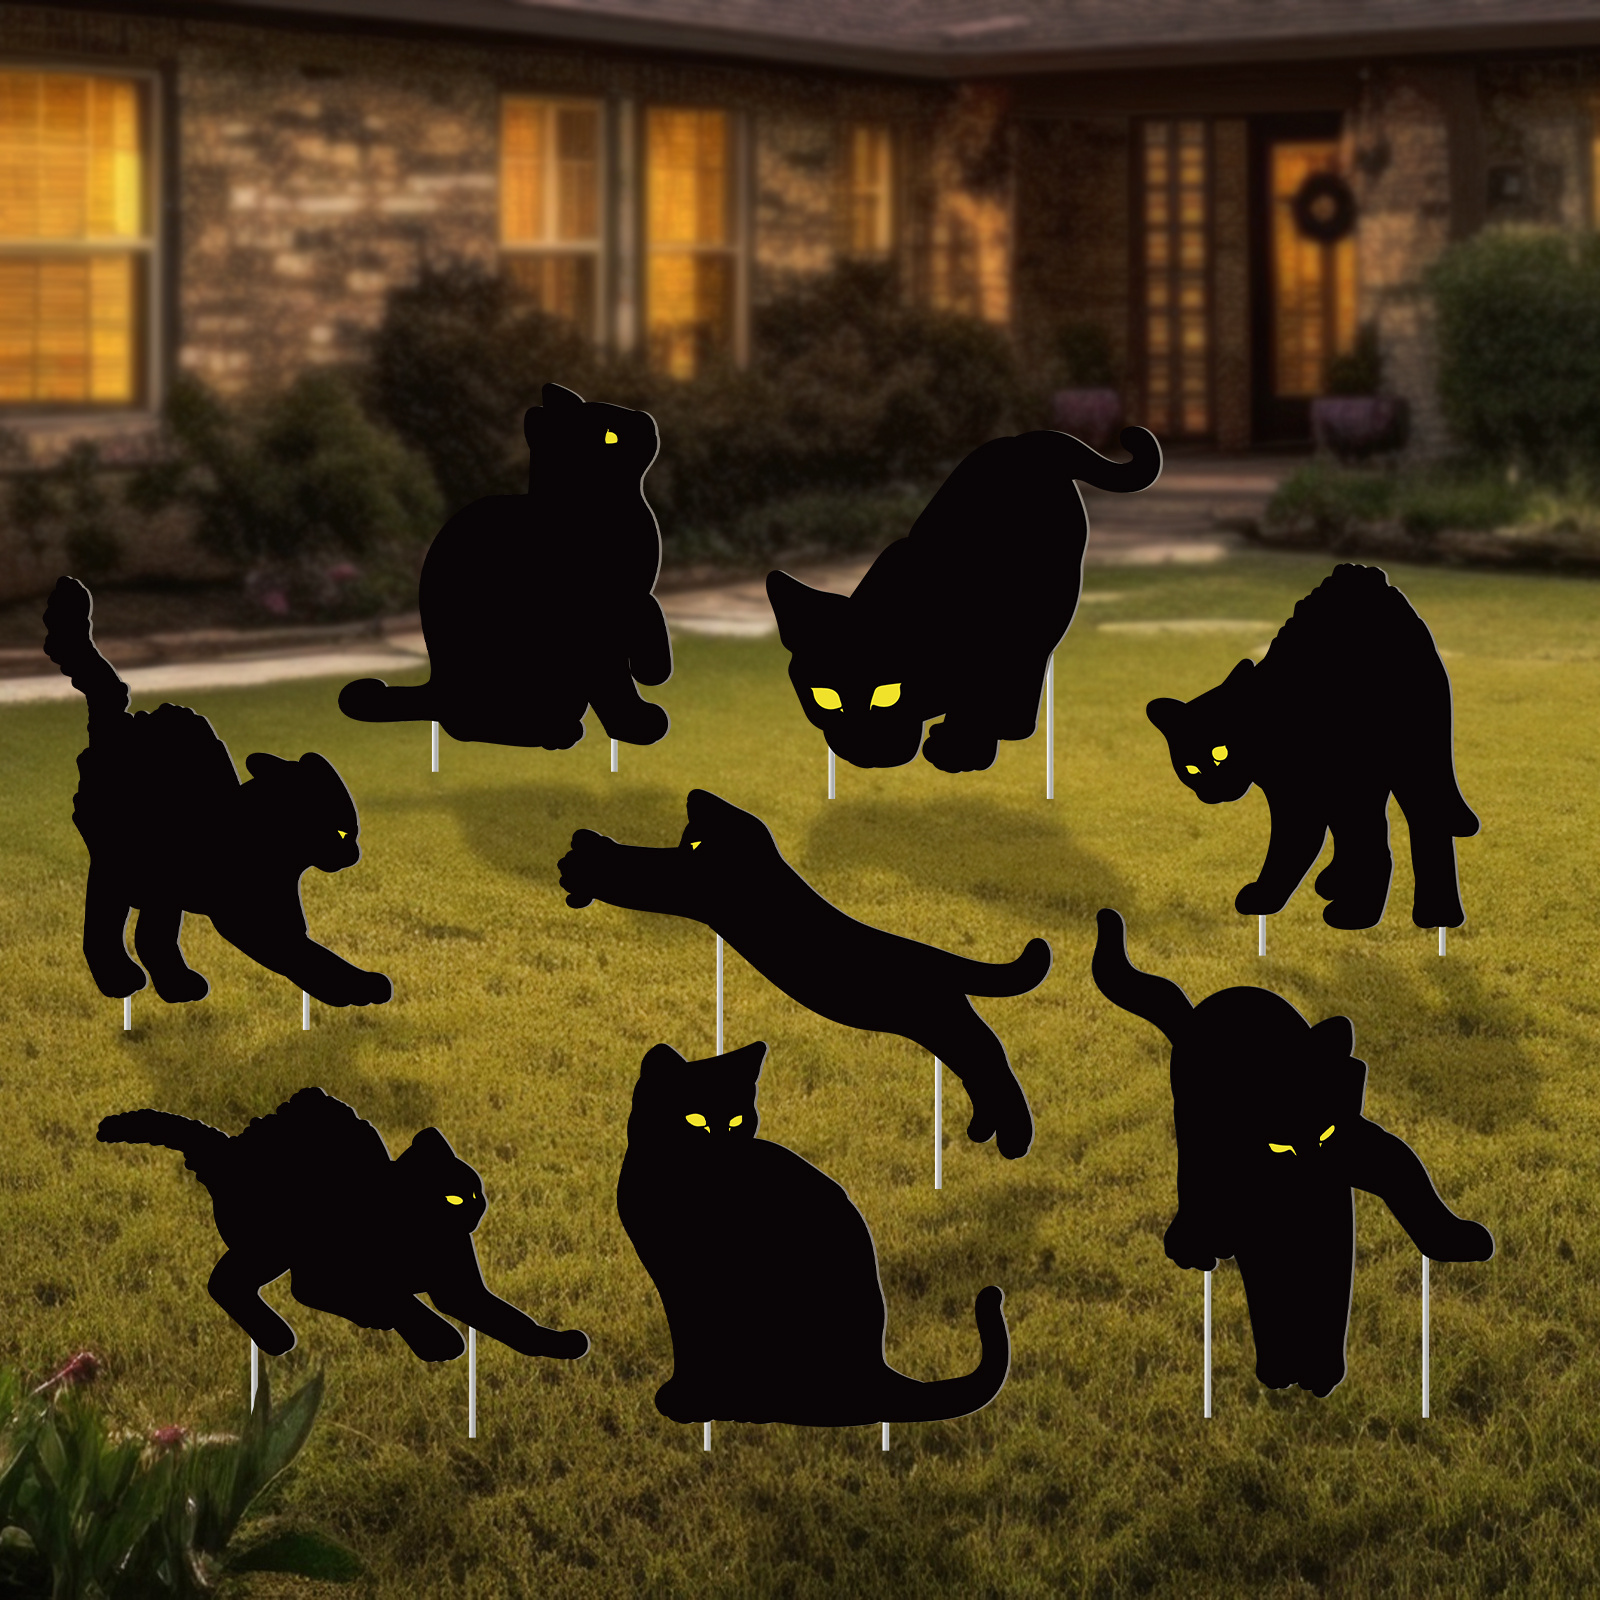 

Kaijit 8pc Black Cat Silhouette Halloween Yard Signs Stakes Outdoor Decorations - 3pcs Black Cat Lawn Decorations Signs For Garden Yard Scary Halloween Witch Decorations Outside (black Cat)